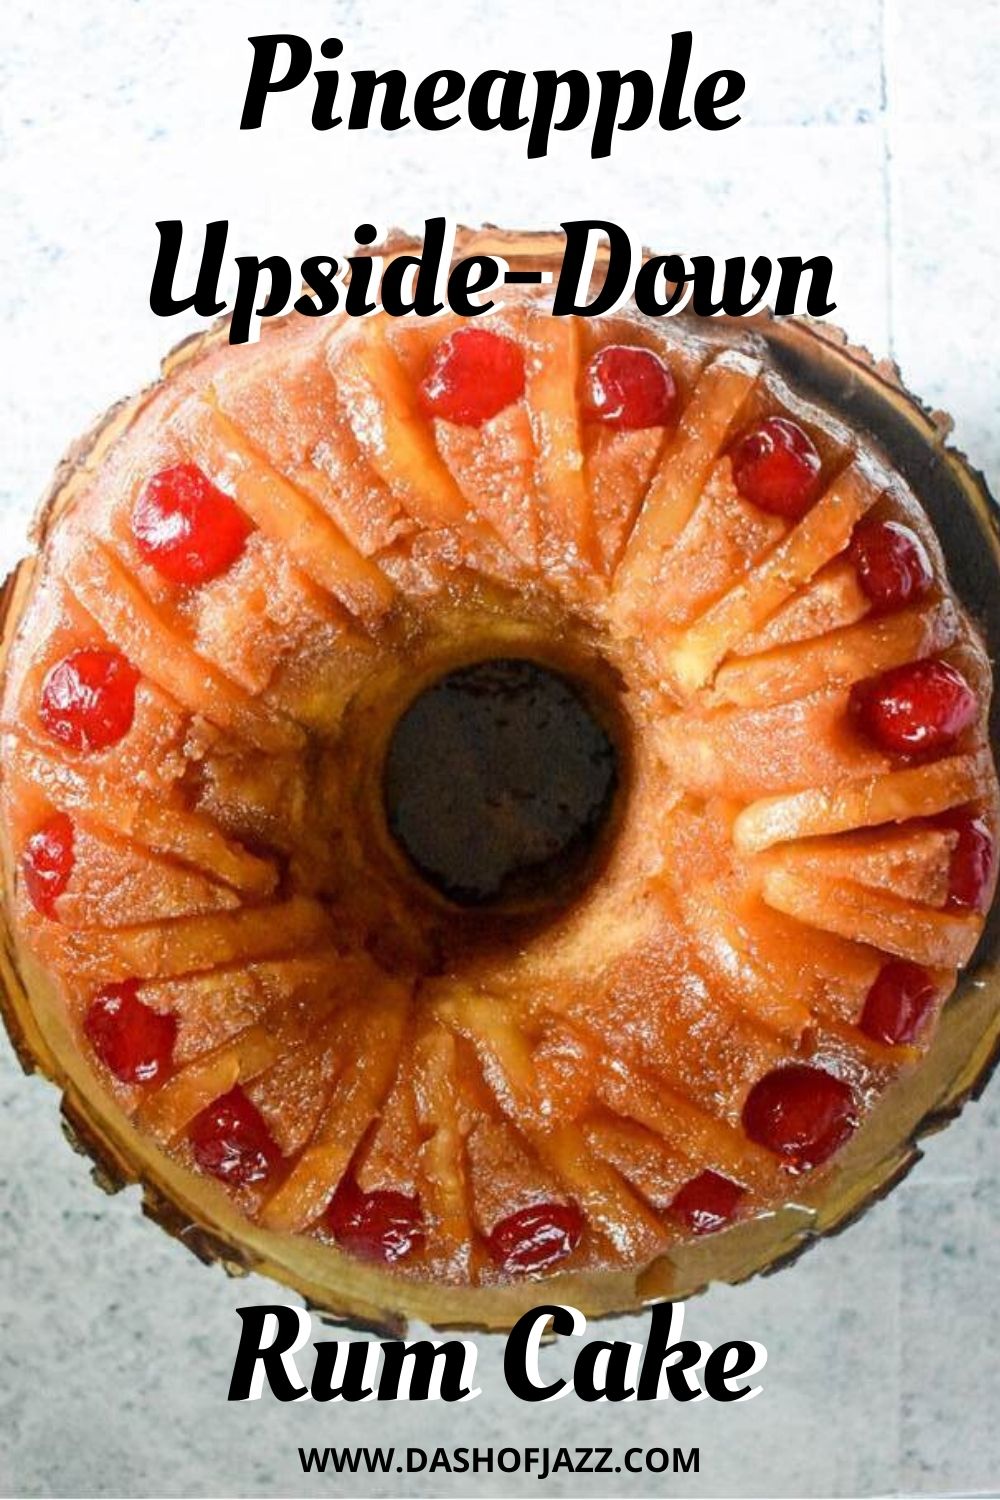 overhead view of pineapple upside down rum cake with text overlay.